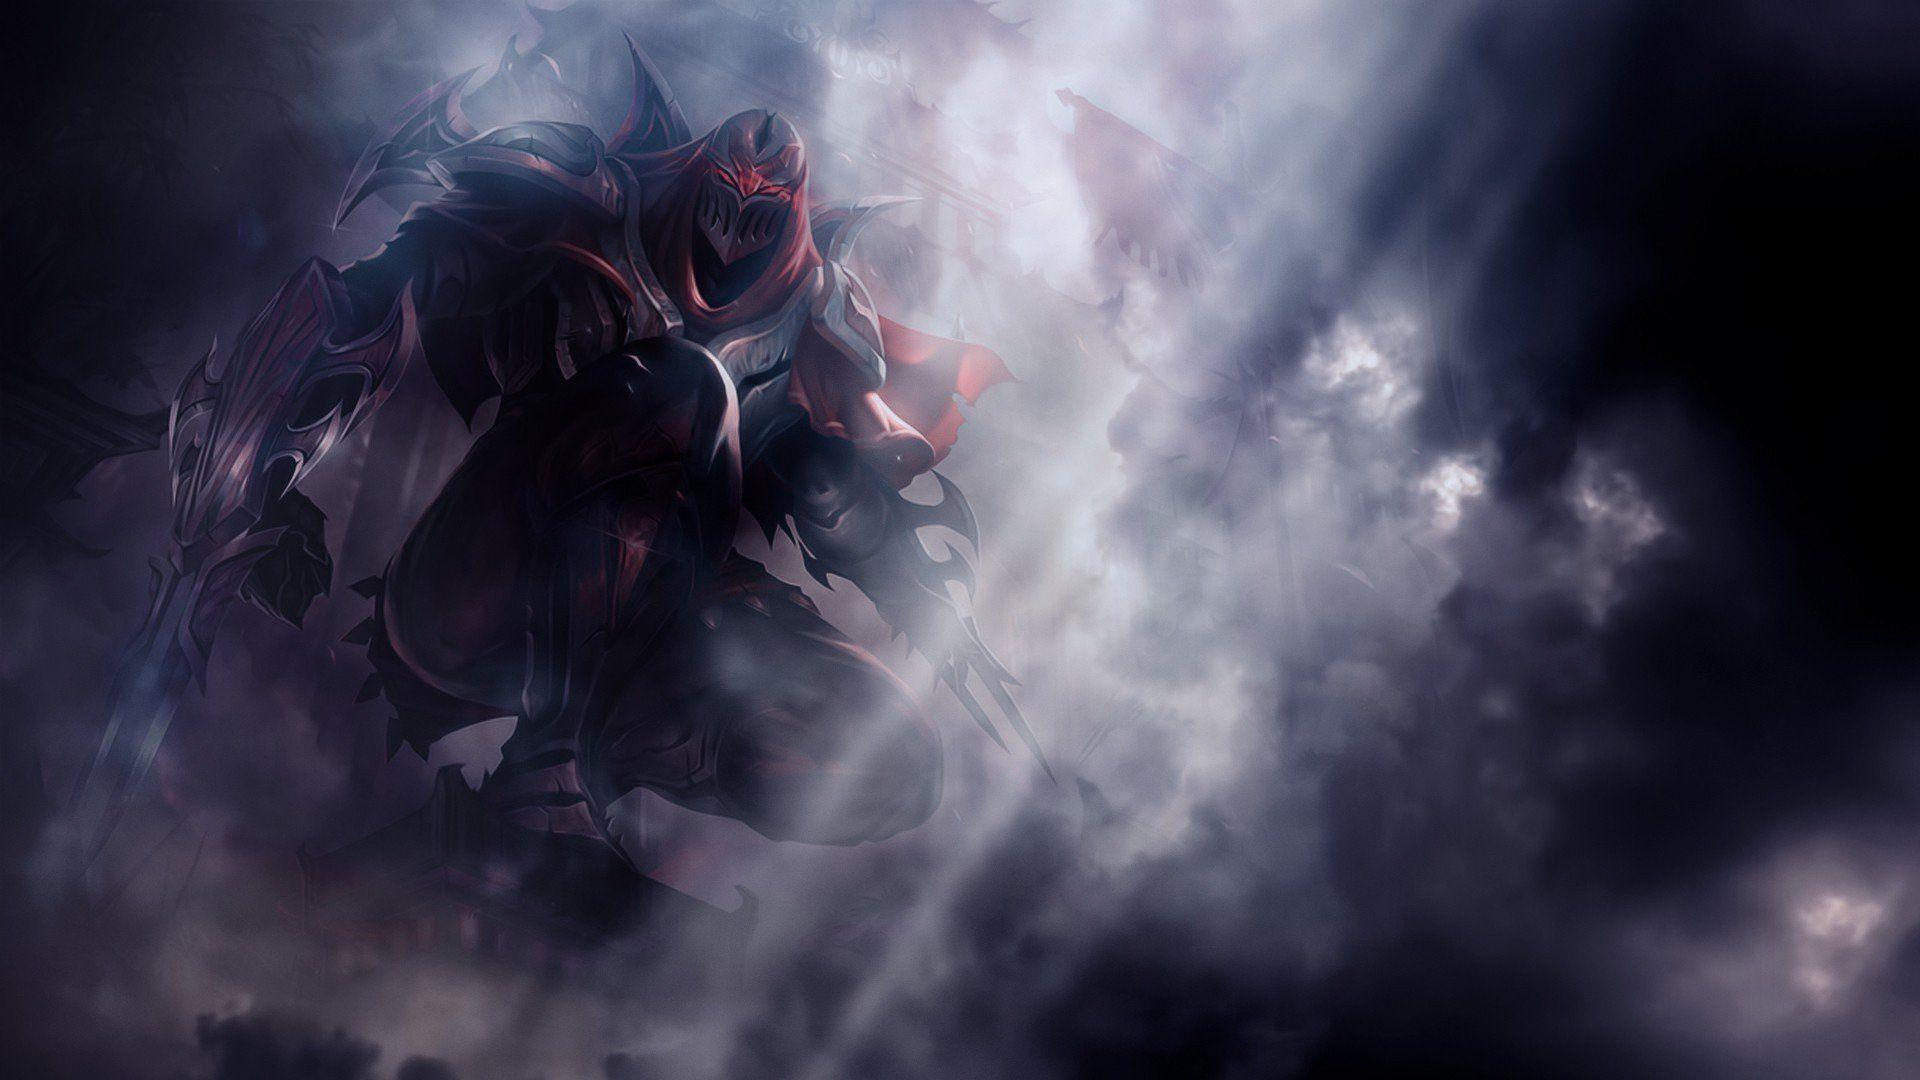 Introducing Zed, The Master of Shadows